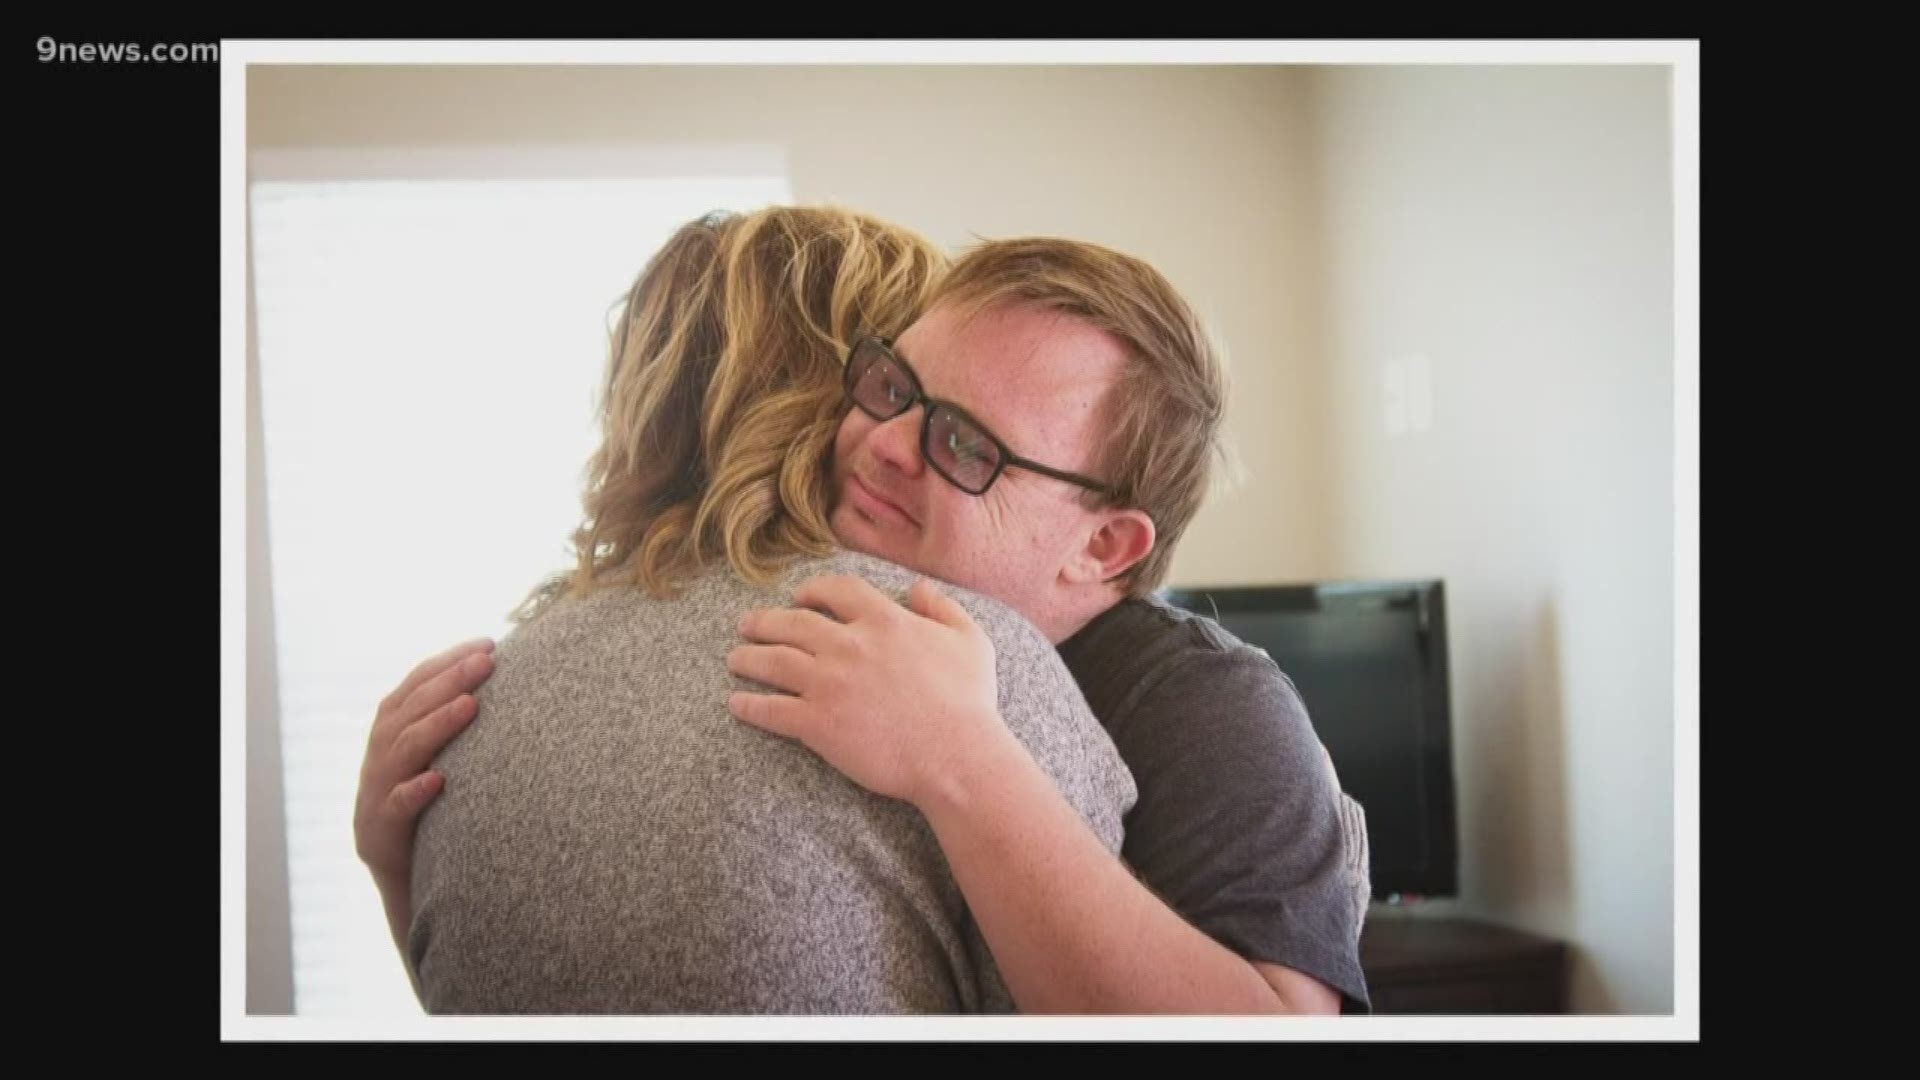 An man with Down syndrome in Firestone now has his own "House of Joy." Photojournalist Taylor Schuss captured the moment Seth Truitt's parents unveiled his new home.